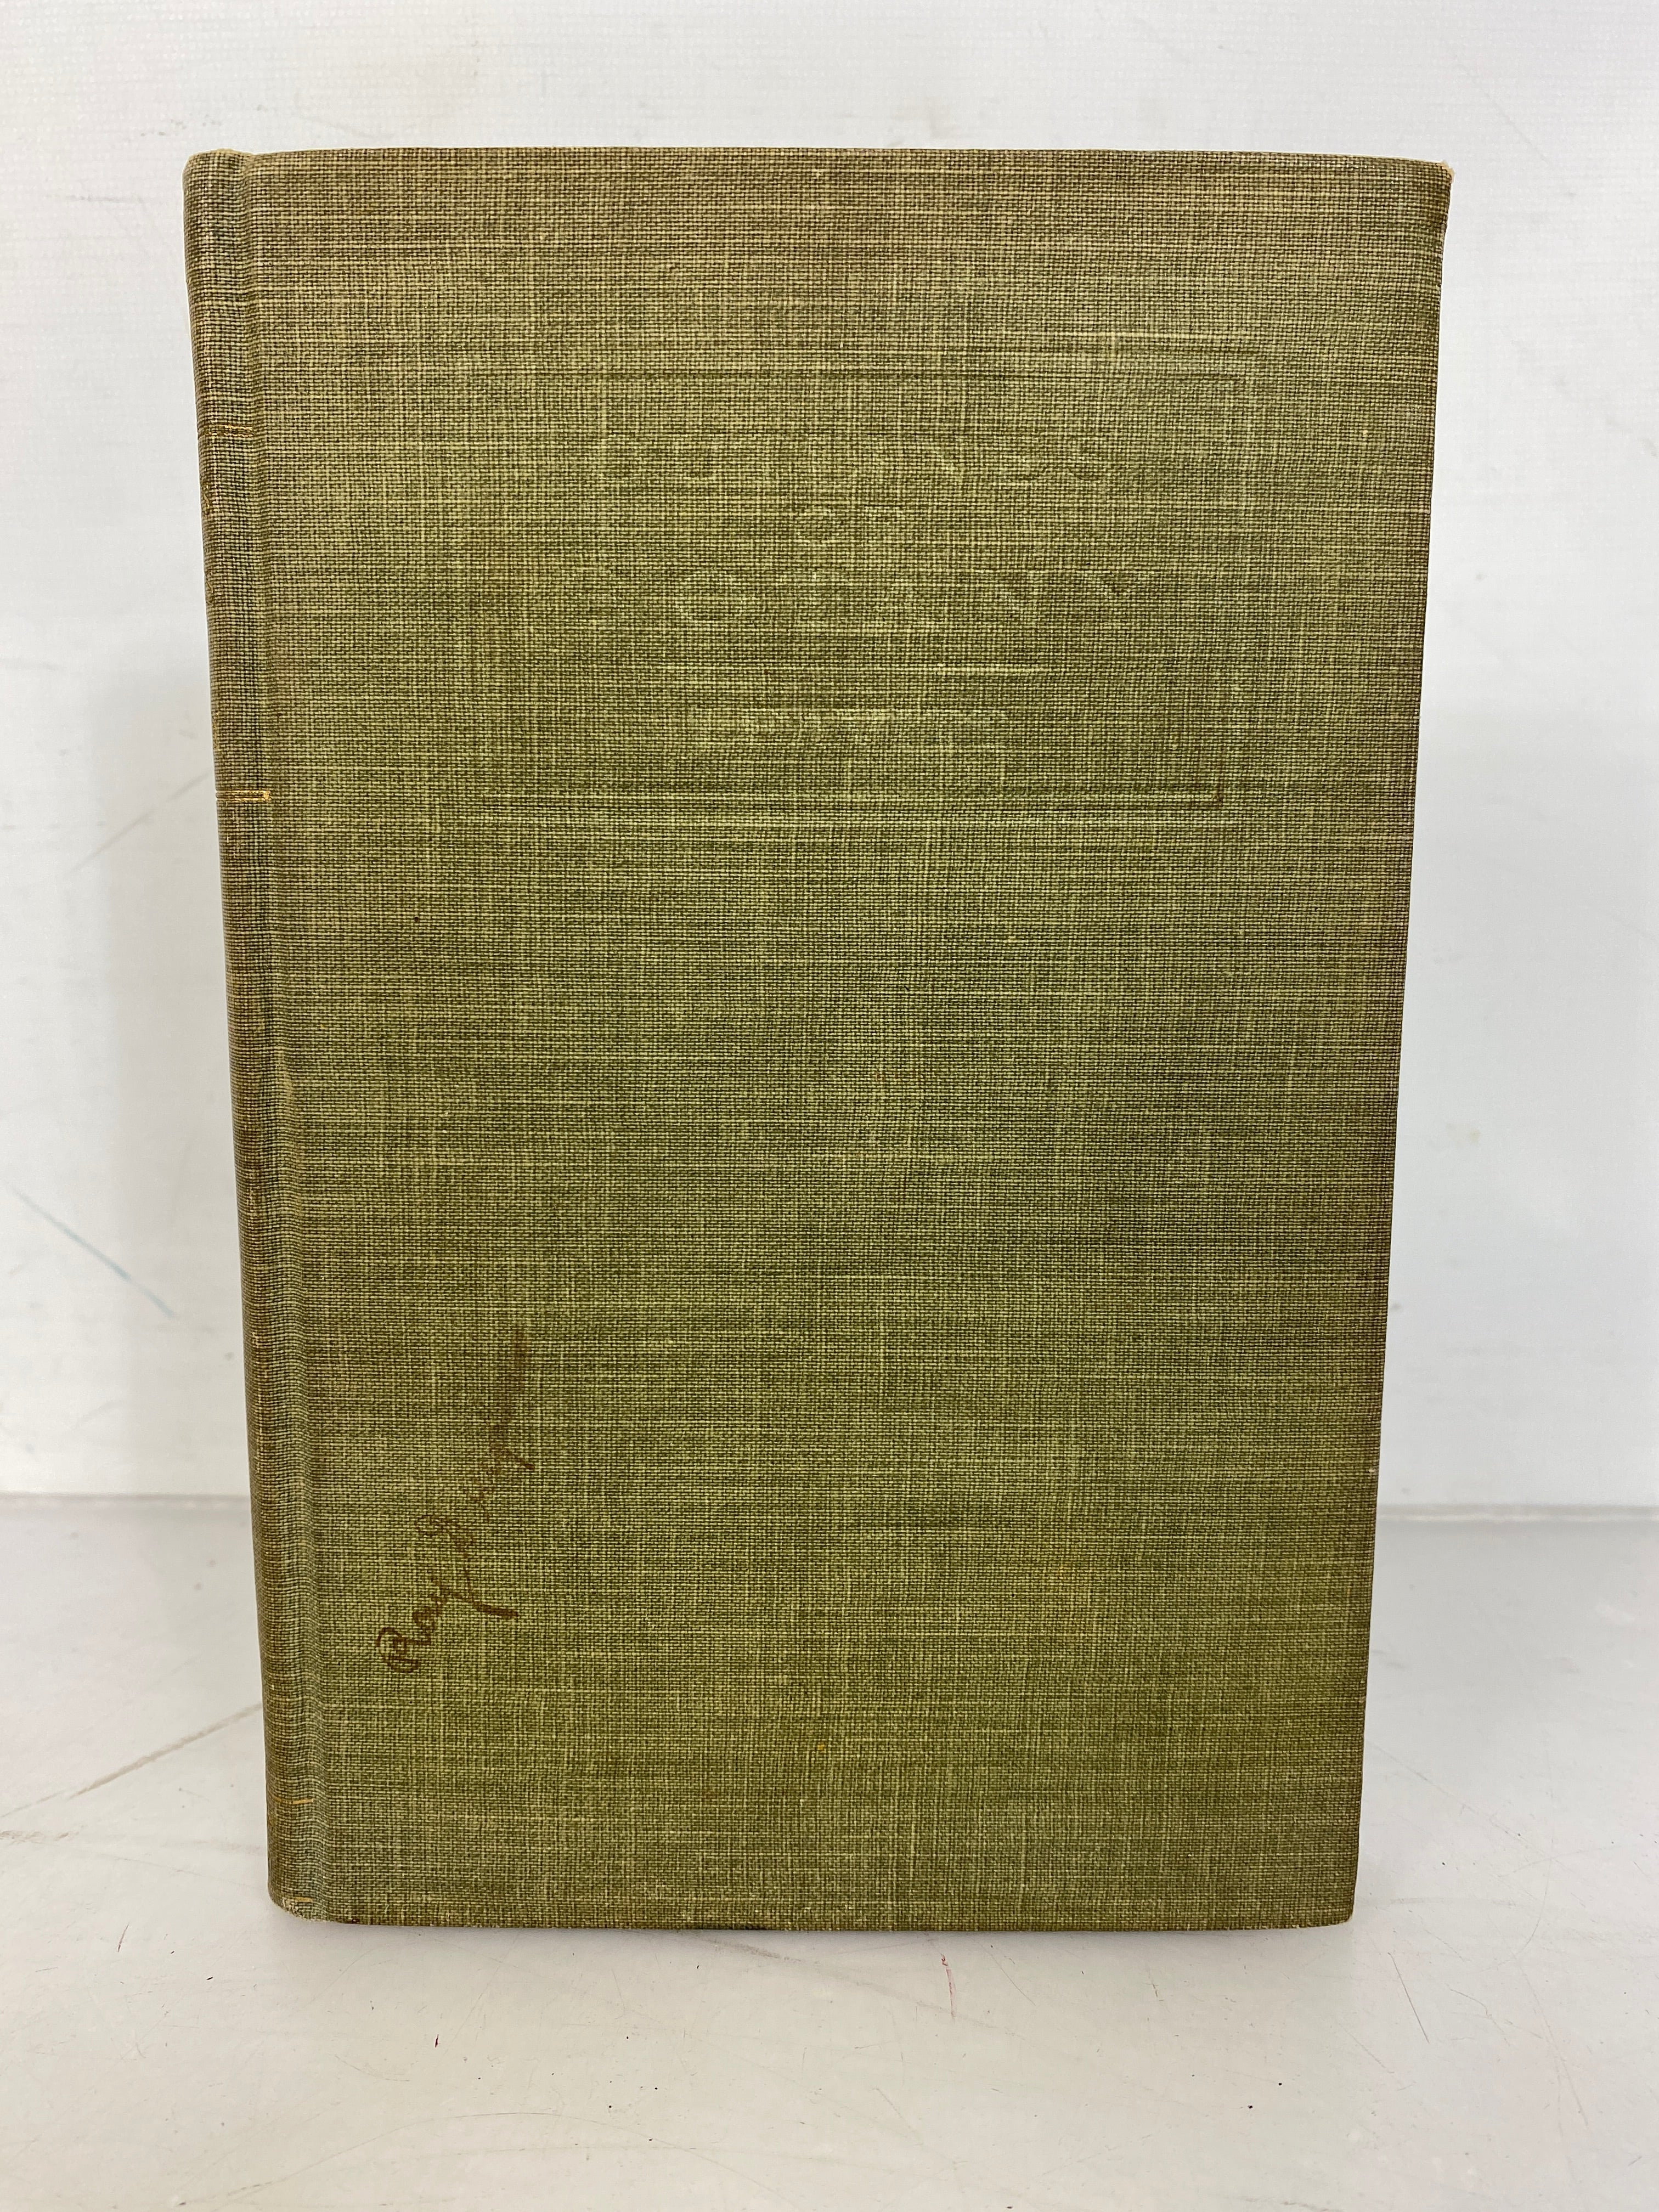 Outlines of Botany for the High School Lab by Robert Greenleaf Leavitt 1901 HC